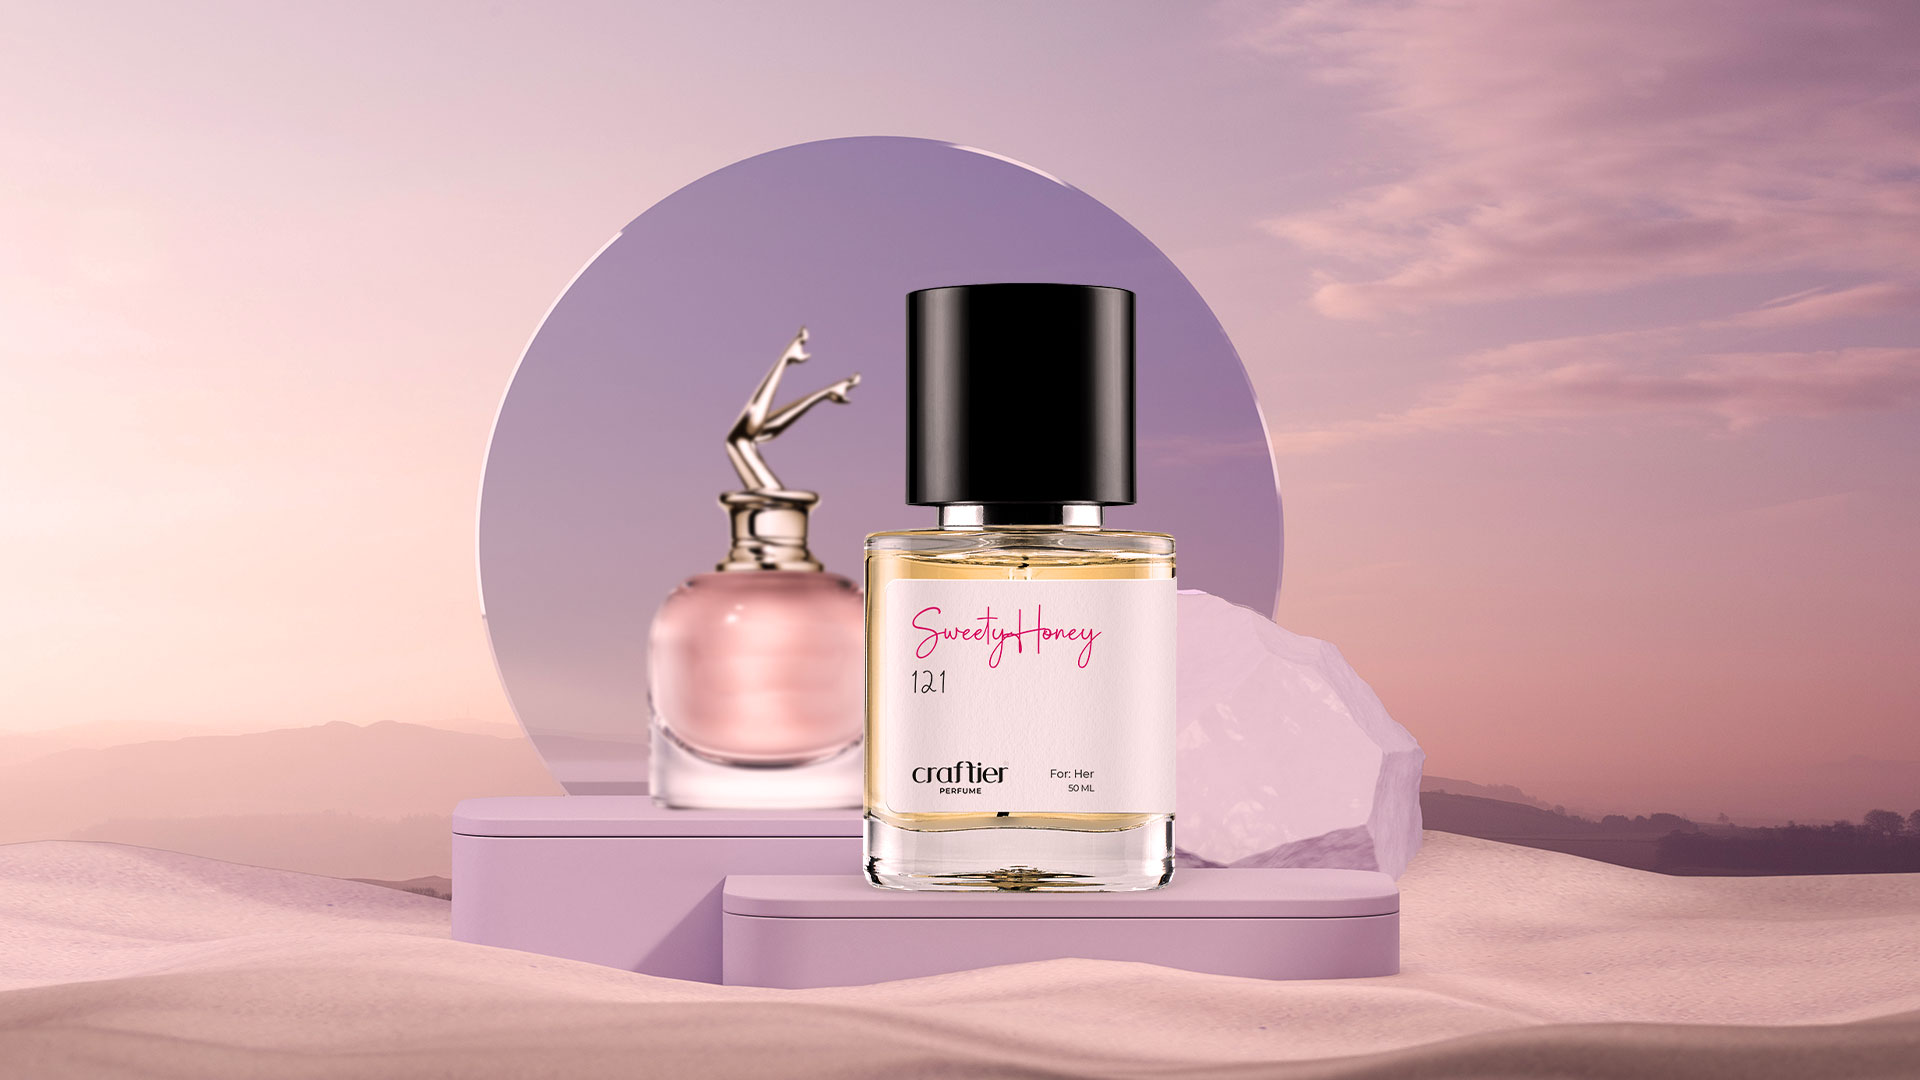 Top Selling Perfumes for Women in the UAE